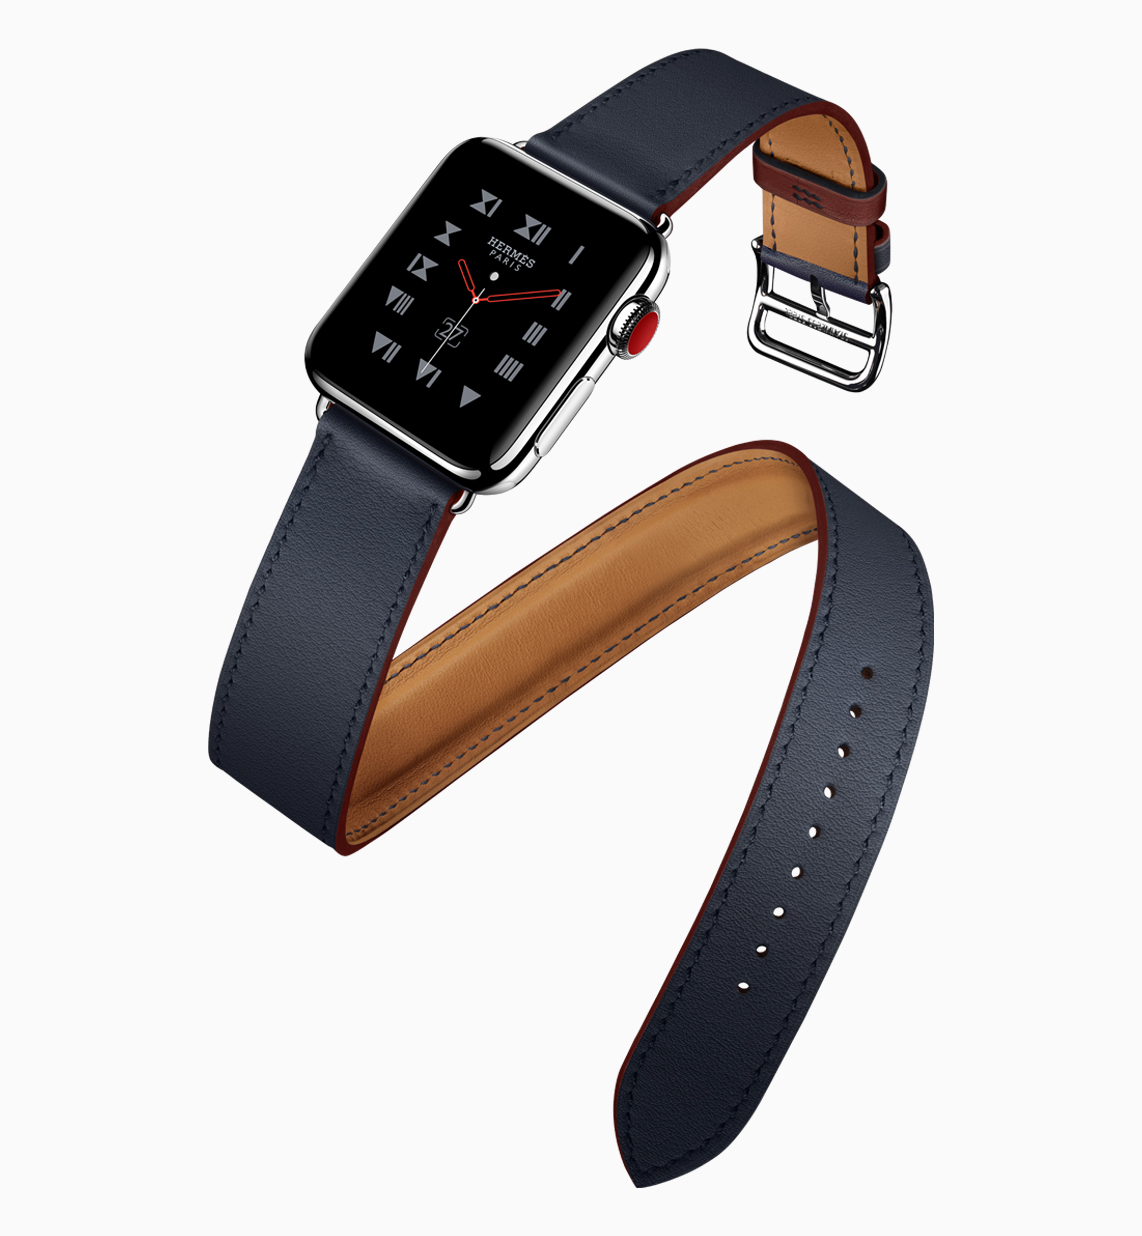 Apple Debuts New Spring Collection of Apple Watch Bands